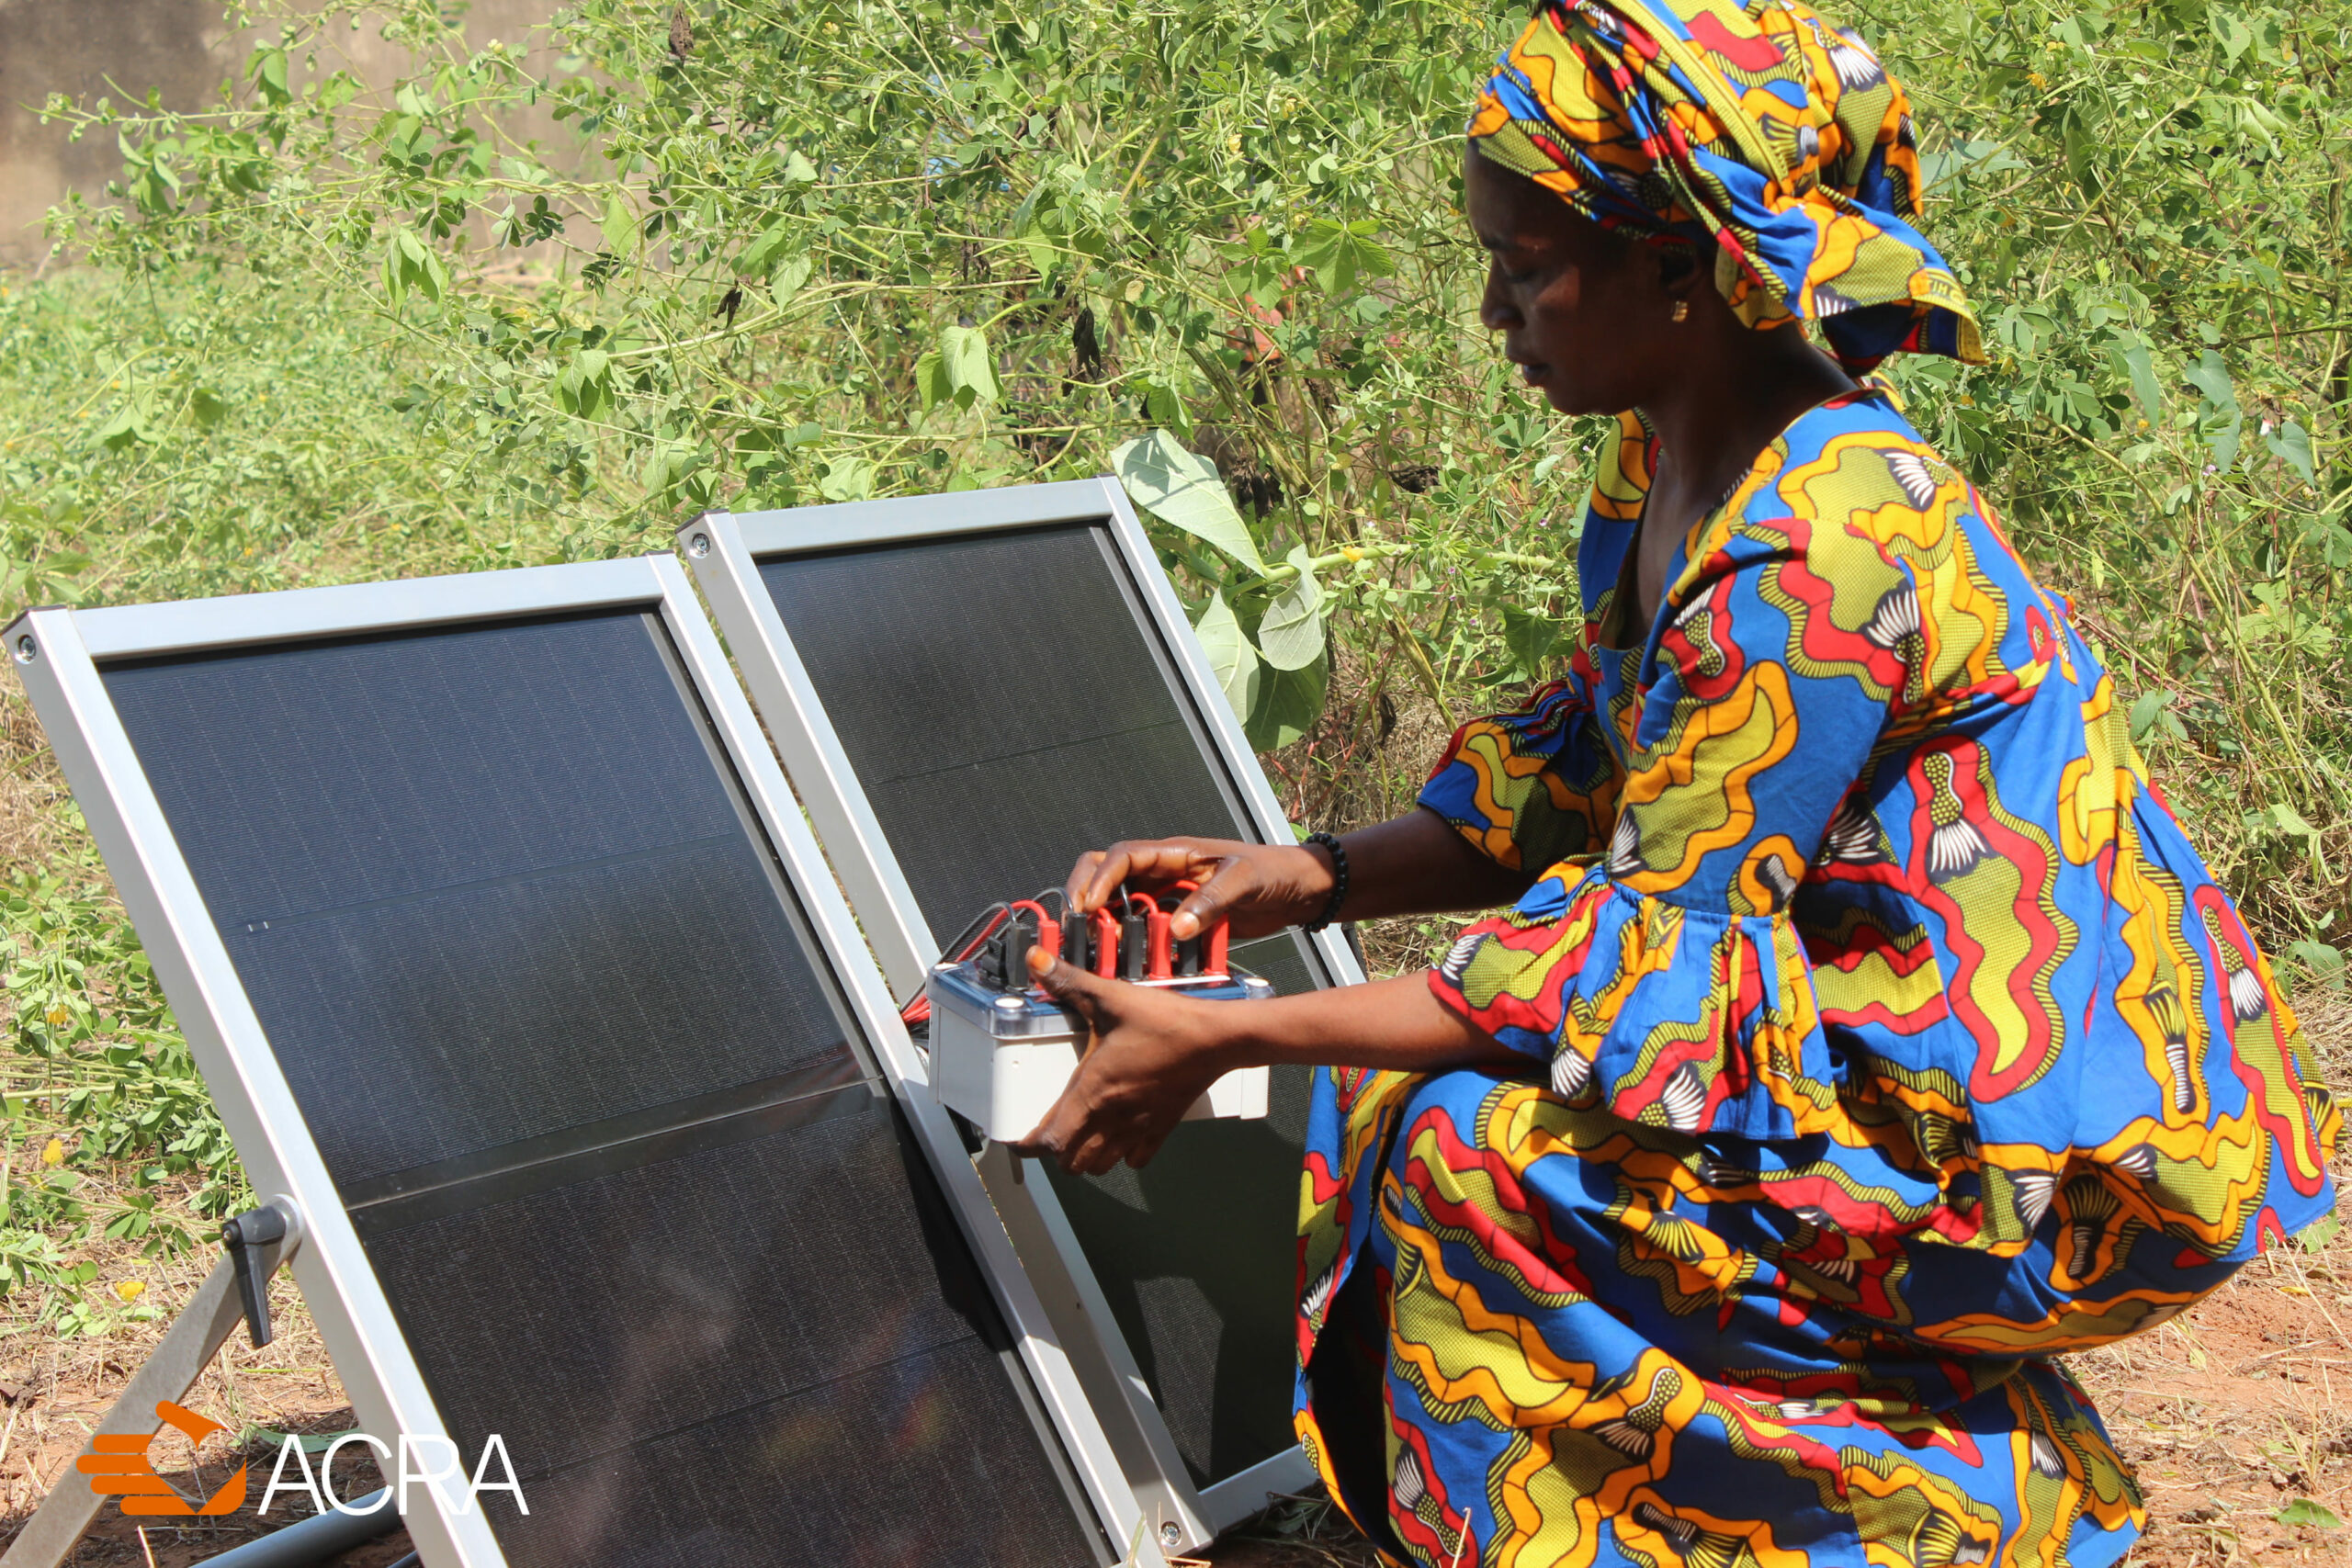 A woman kneels next to a solar panel and adjusts a box with electrical wiring.